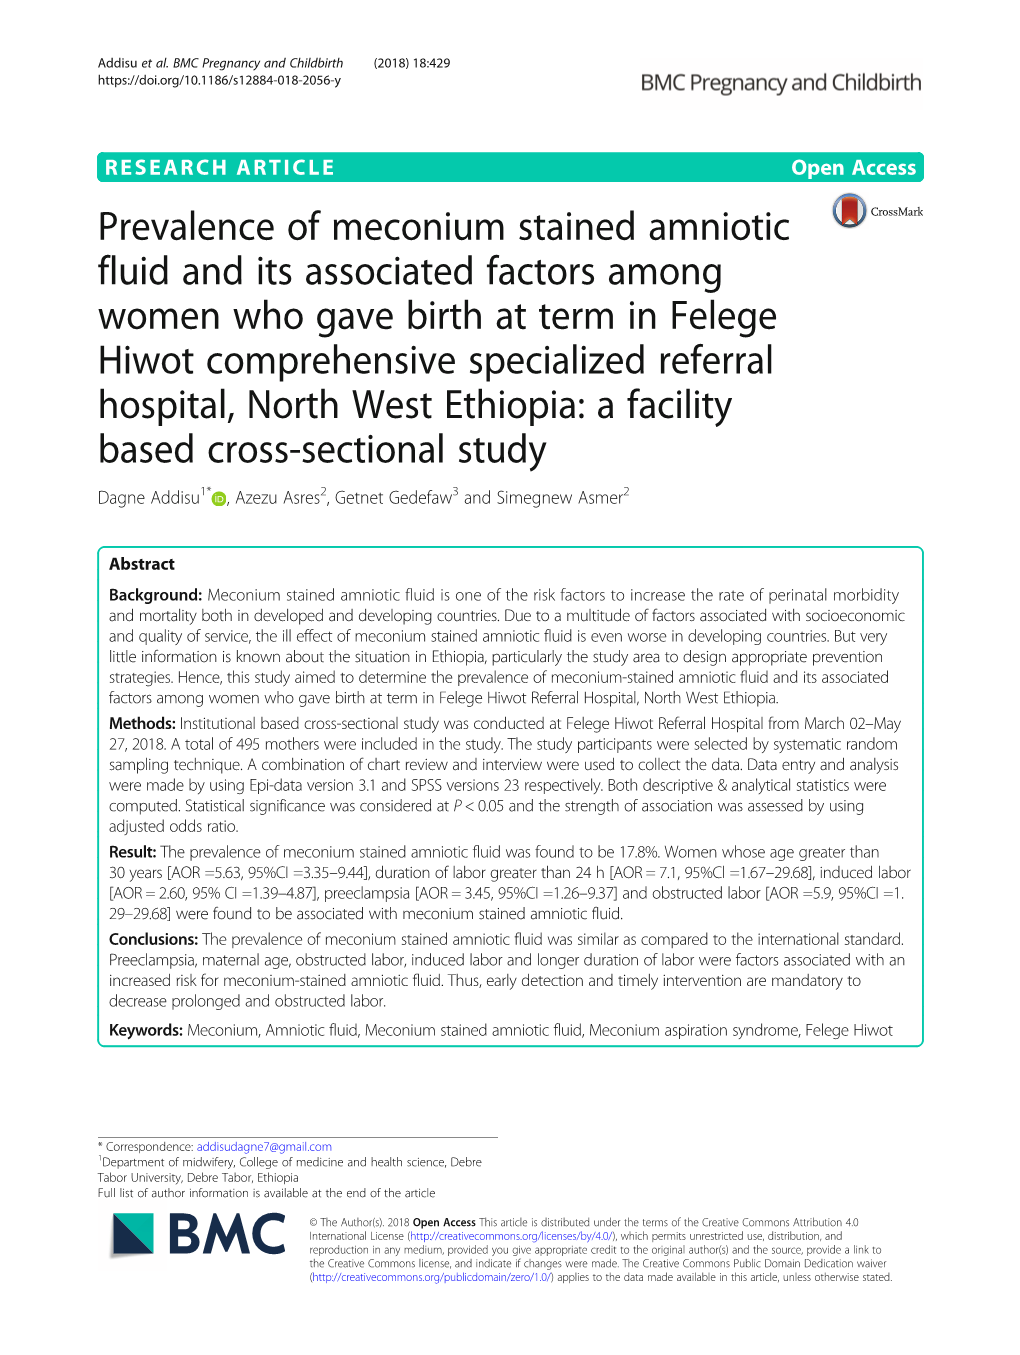 Prevalence of Meconium Stained Amniotic Fluid and Its Associated